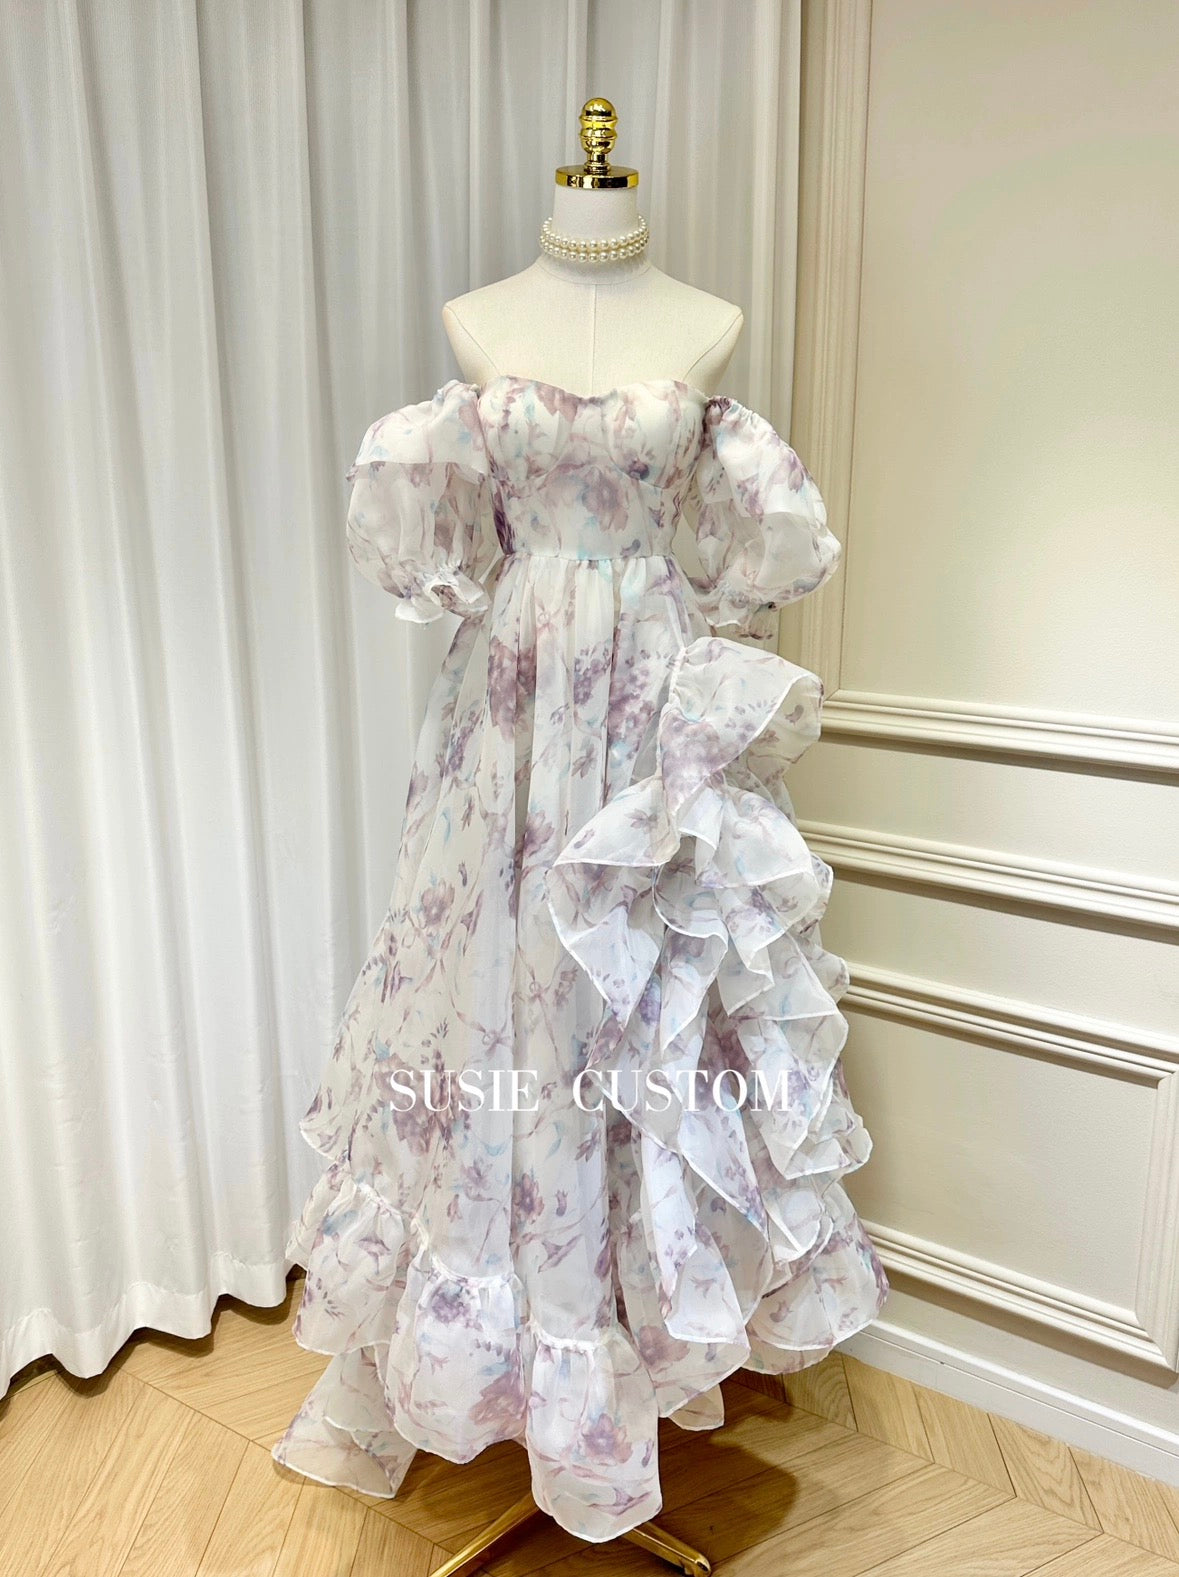 Heavy French style princess dress with chest pad, puff sleeves, off-the-shoulder, ruffles, slits, large swing, floor-length trailing tail